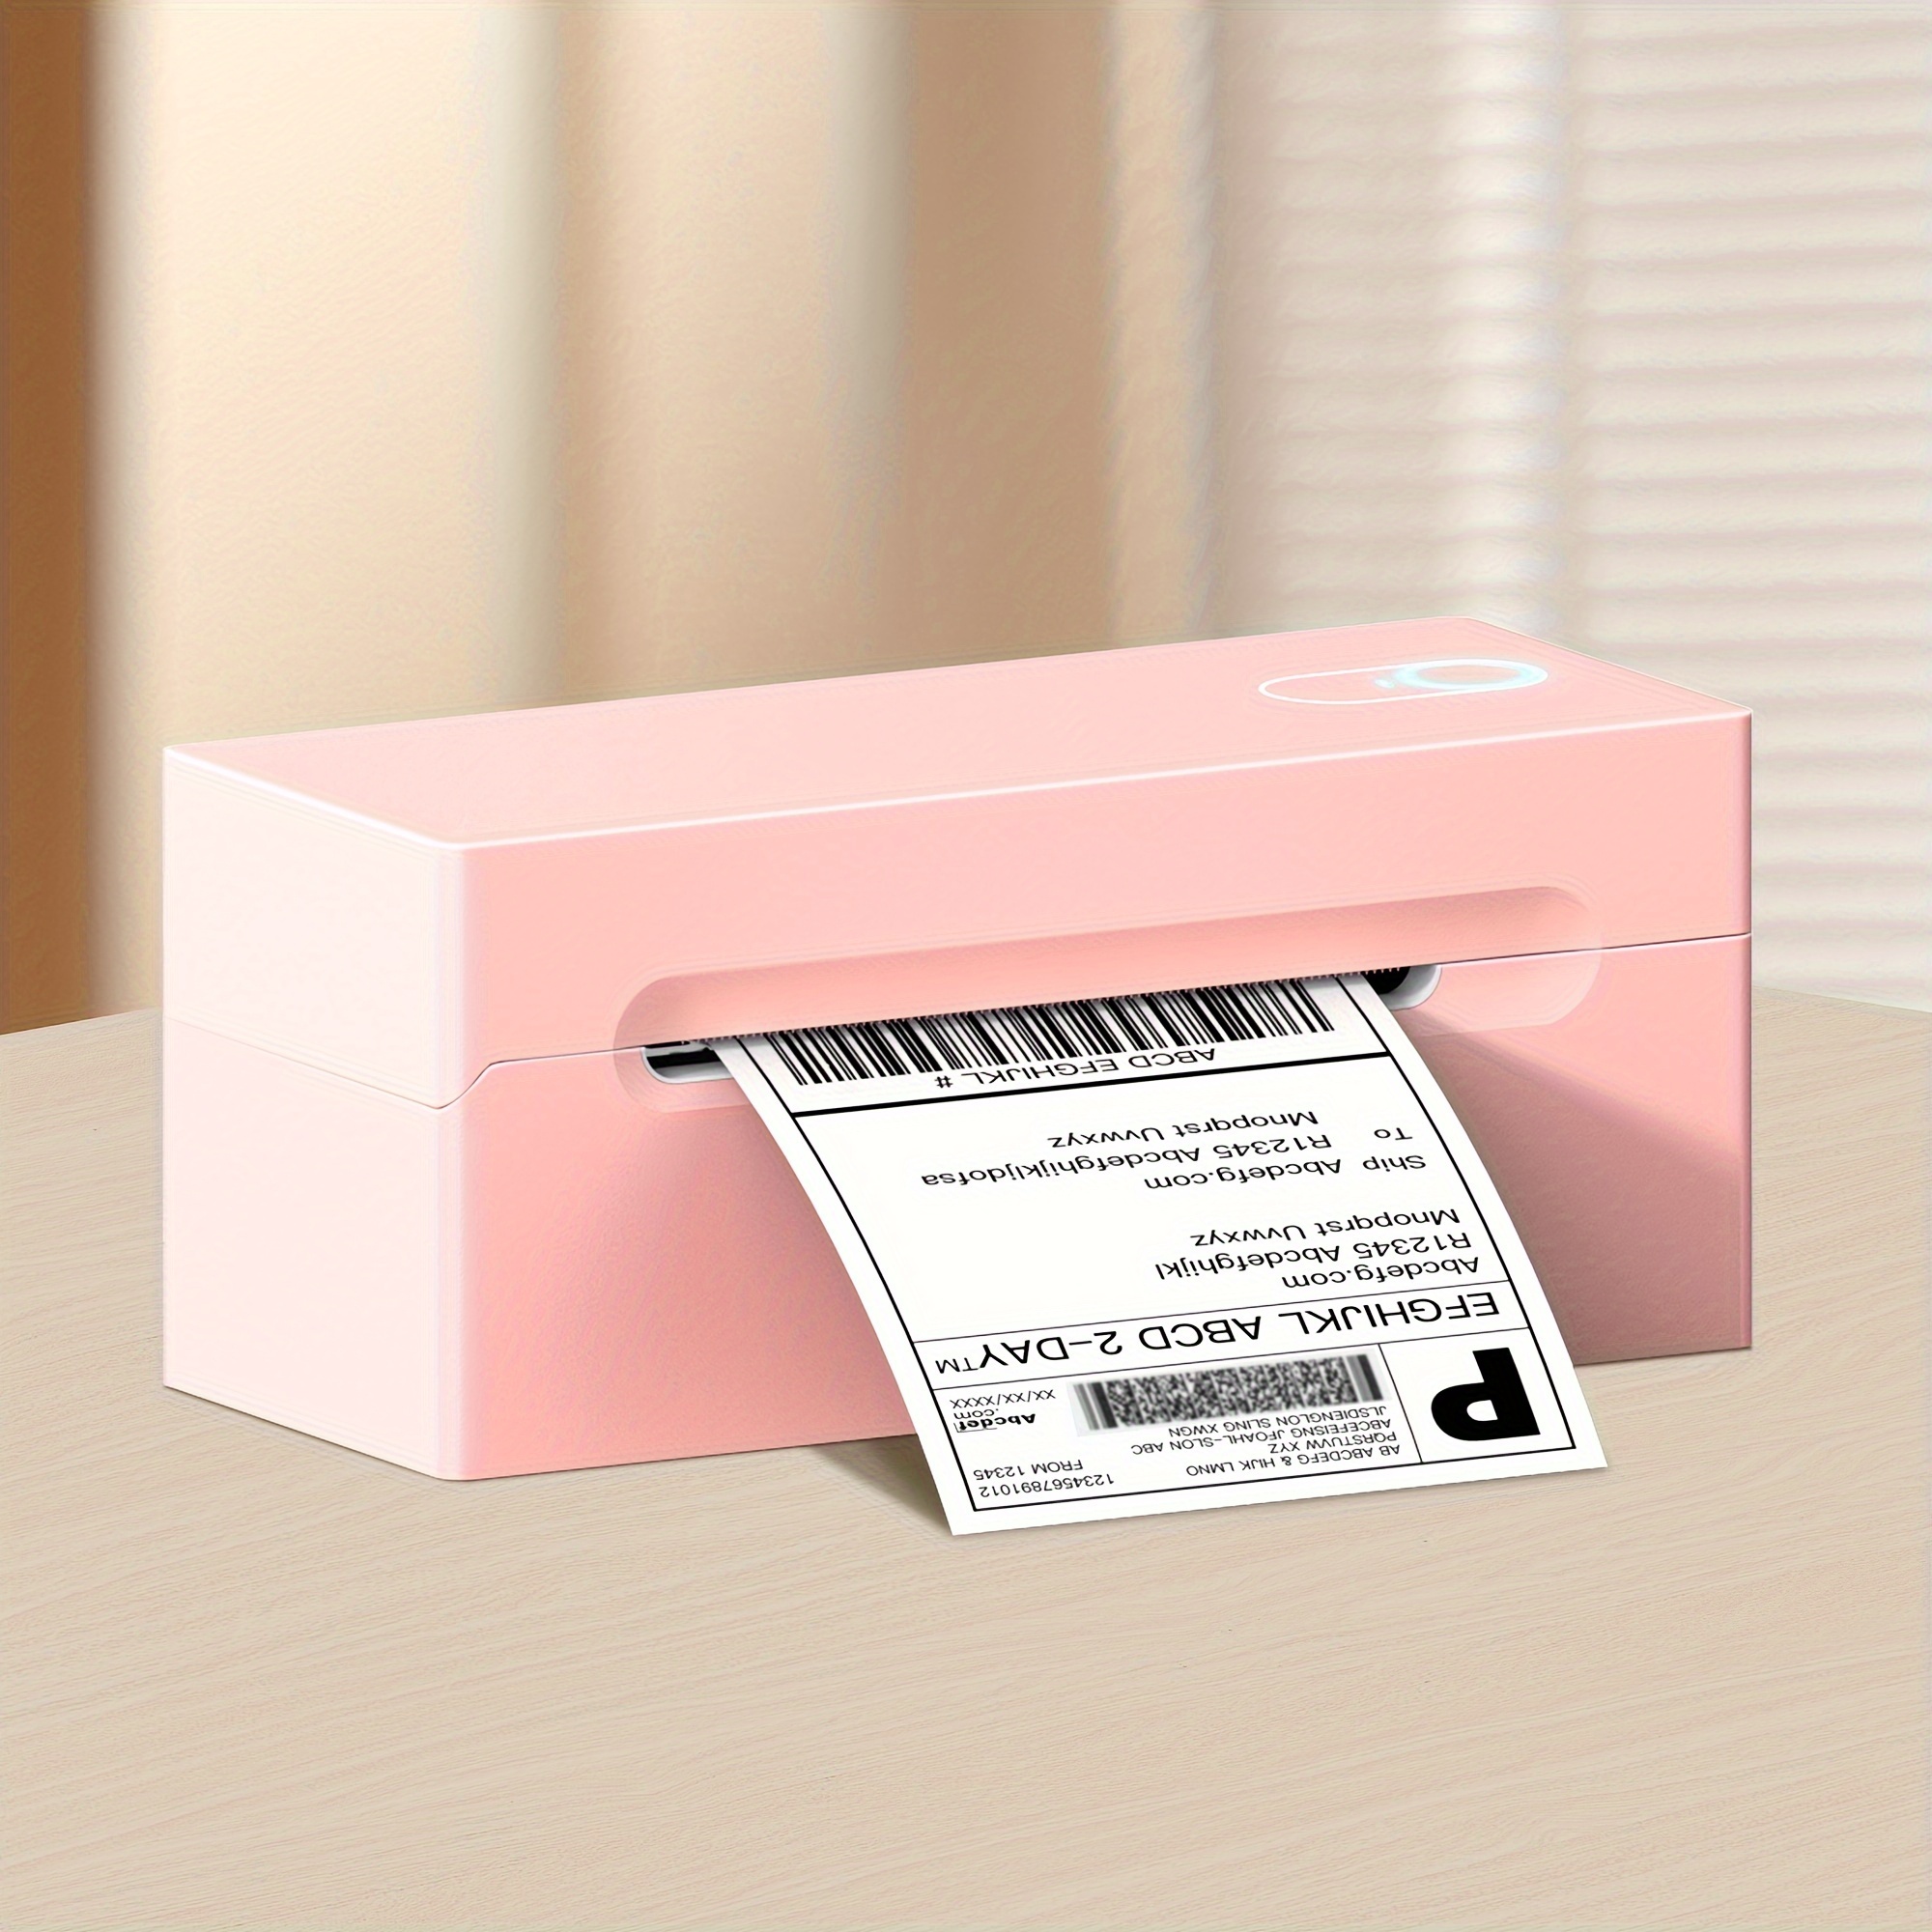 

Thermal Shipping Label Printer, Wireless 4x6 Shipping Label Printer For Small Business, Support Android, , Windows, And , Pink